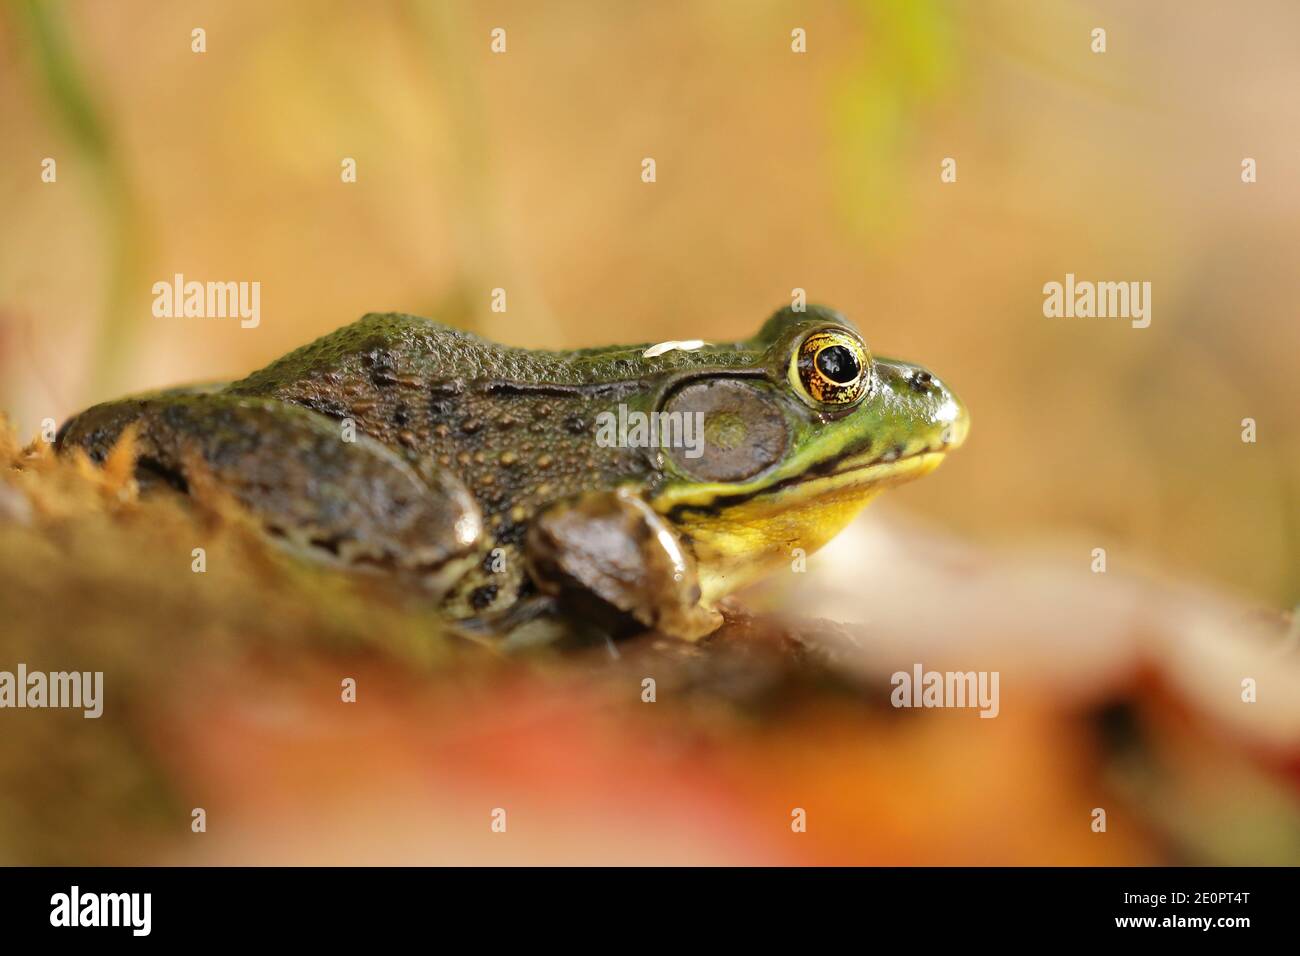 Close up of an American bullfrog (Lithobates catesbeianus) in a freshwater lake of North America Stock Photo